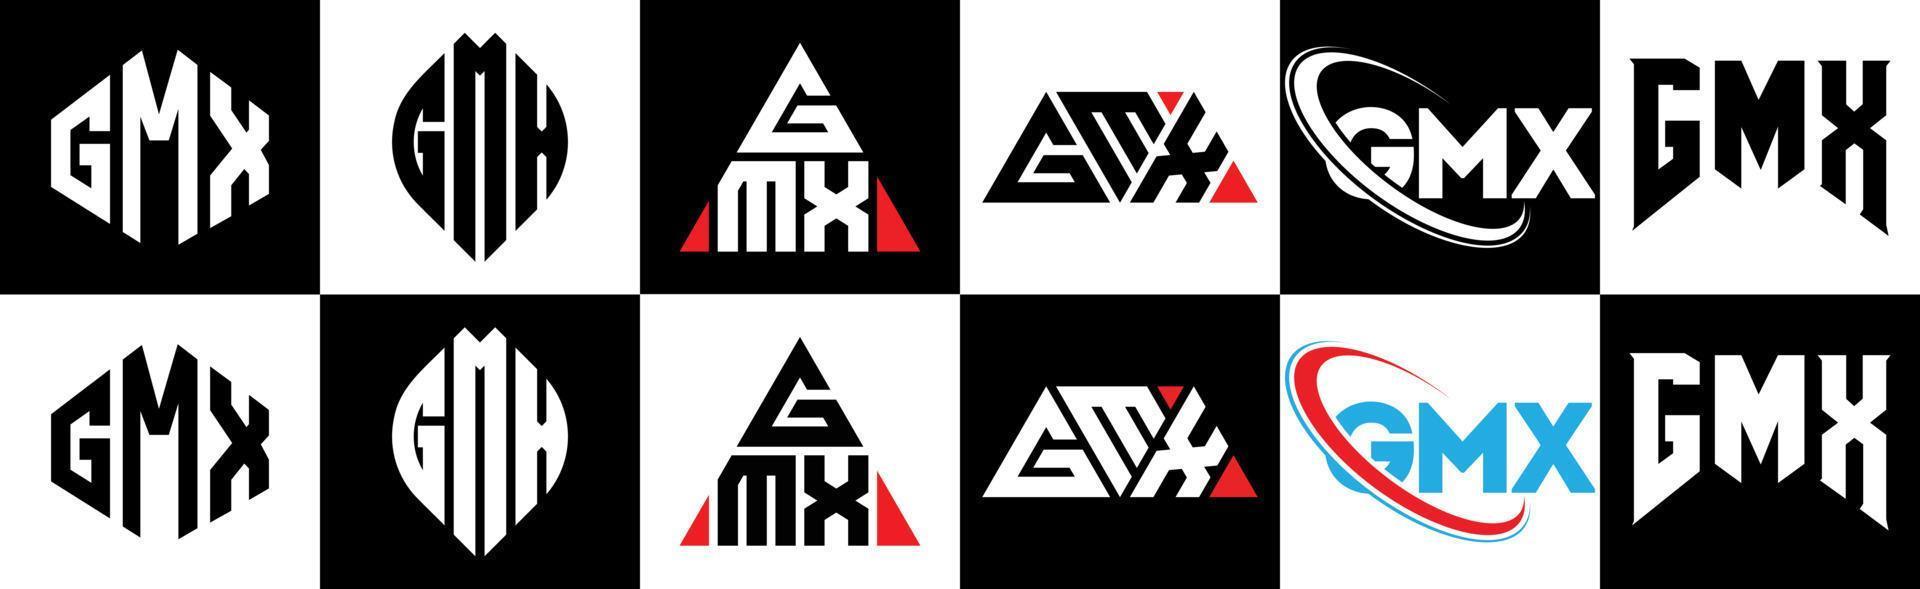 GMX letter logo design in six style. GMX polygon, circle, triangle, hexagon, flat and simple style with black and white color variation letter logo set in one artboard. GMX minimalist and classic logo vector